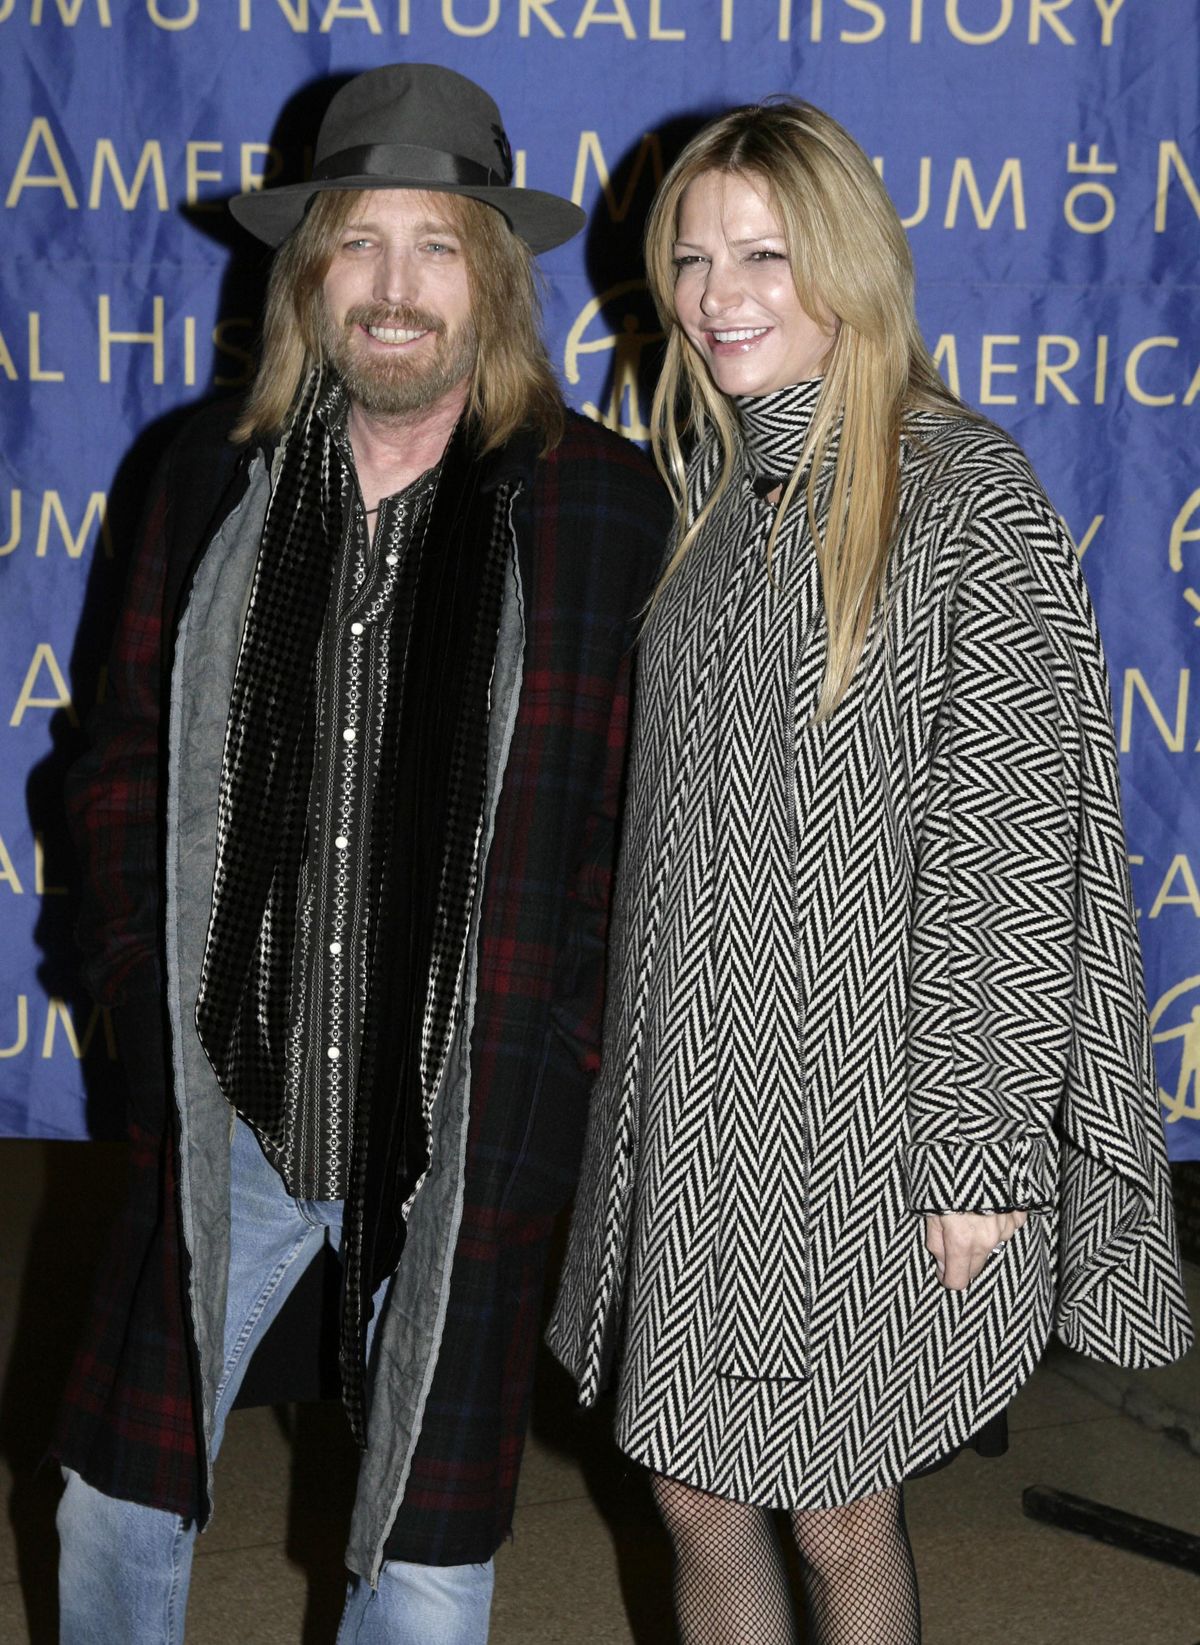 Tom Petty and his wife, Dana, arrive for the gala at the American Museum of Natural History in New York on Nov. 15, 2007. (Seth Wenig / Associated Press)